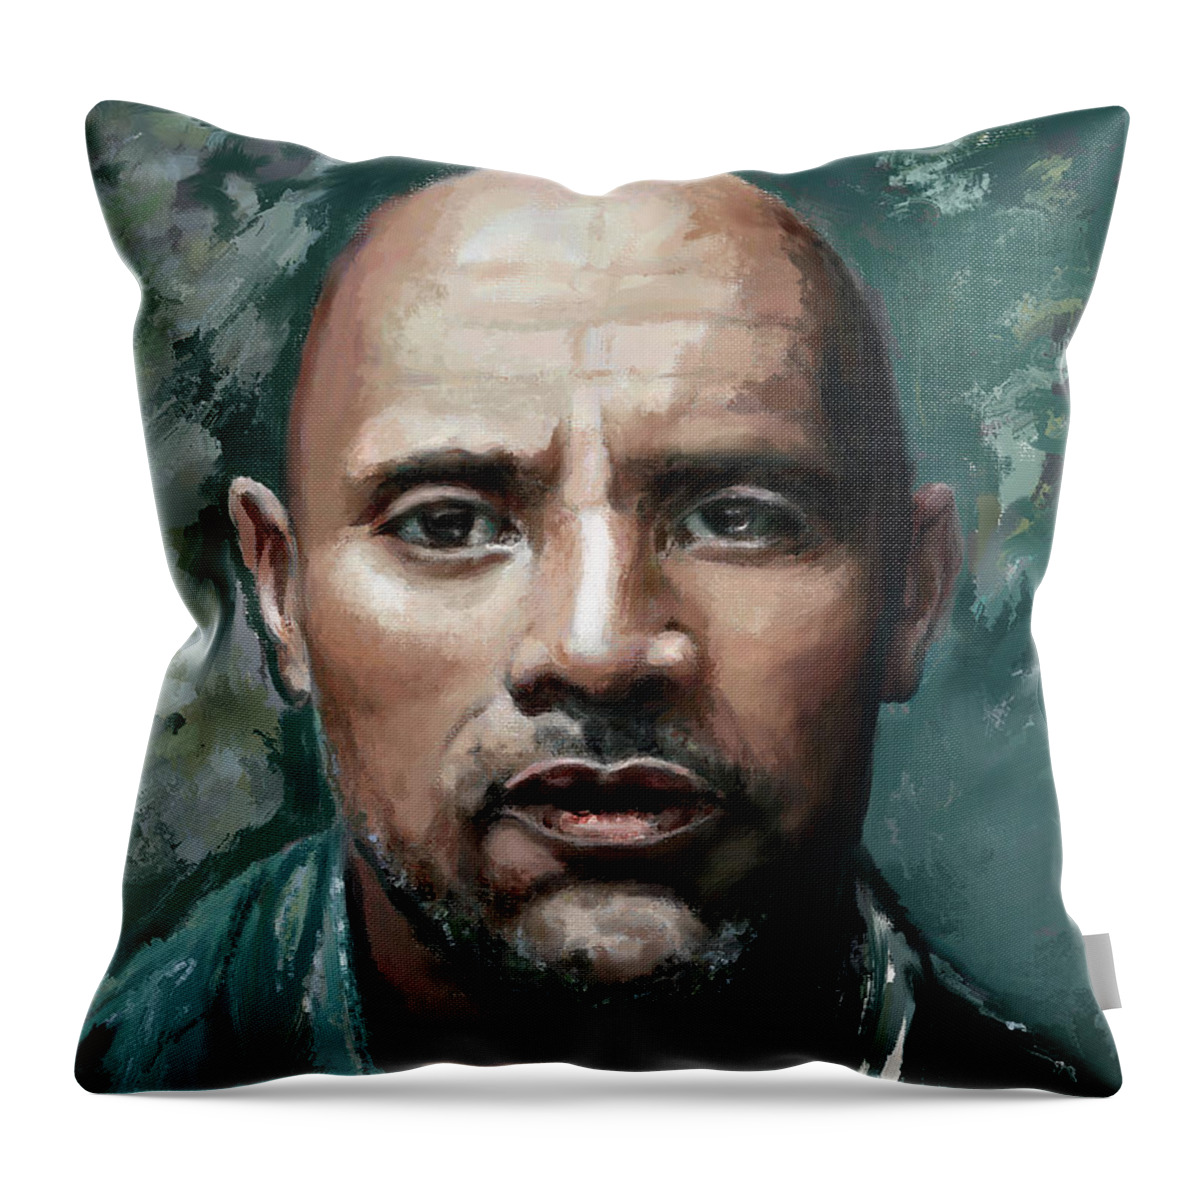 Man Throw Pillow featuring the painting Portrait of a Man by Portraits By NC